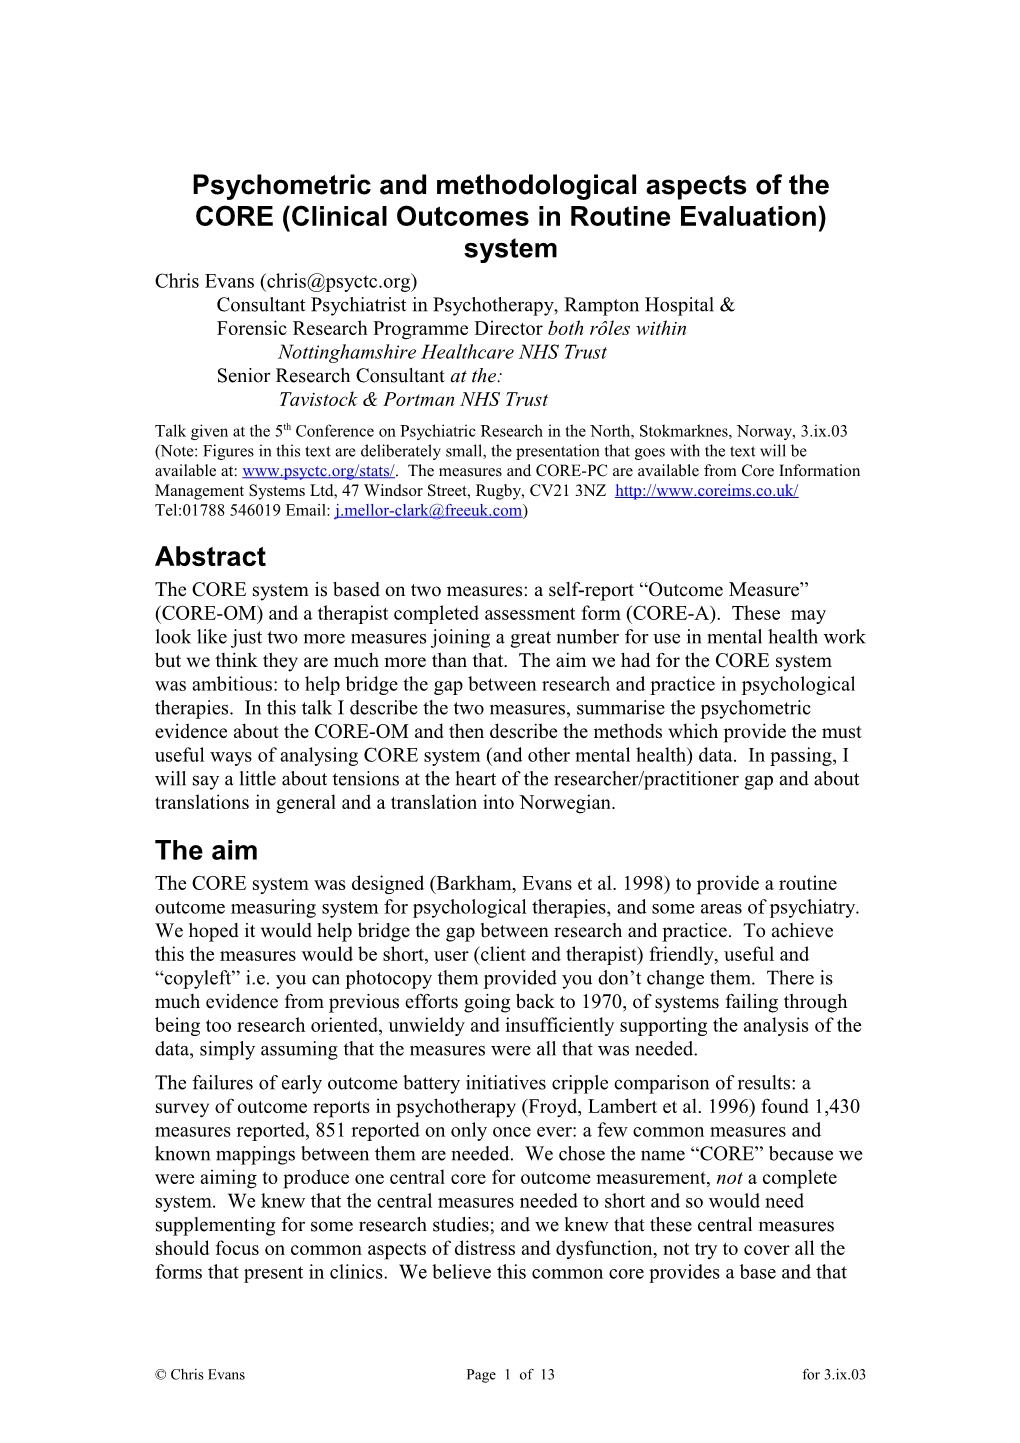 Psychometric and Methodological Aspects of the CORE (Clinical Outcomes in Routine Evaluation)